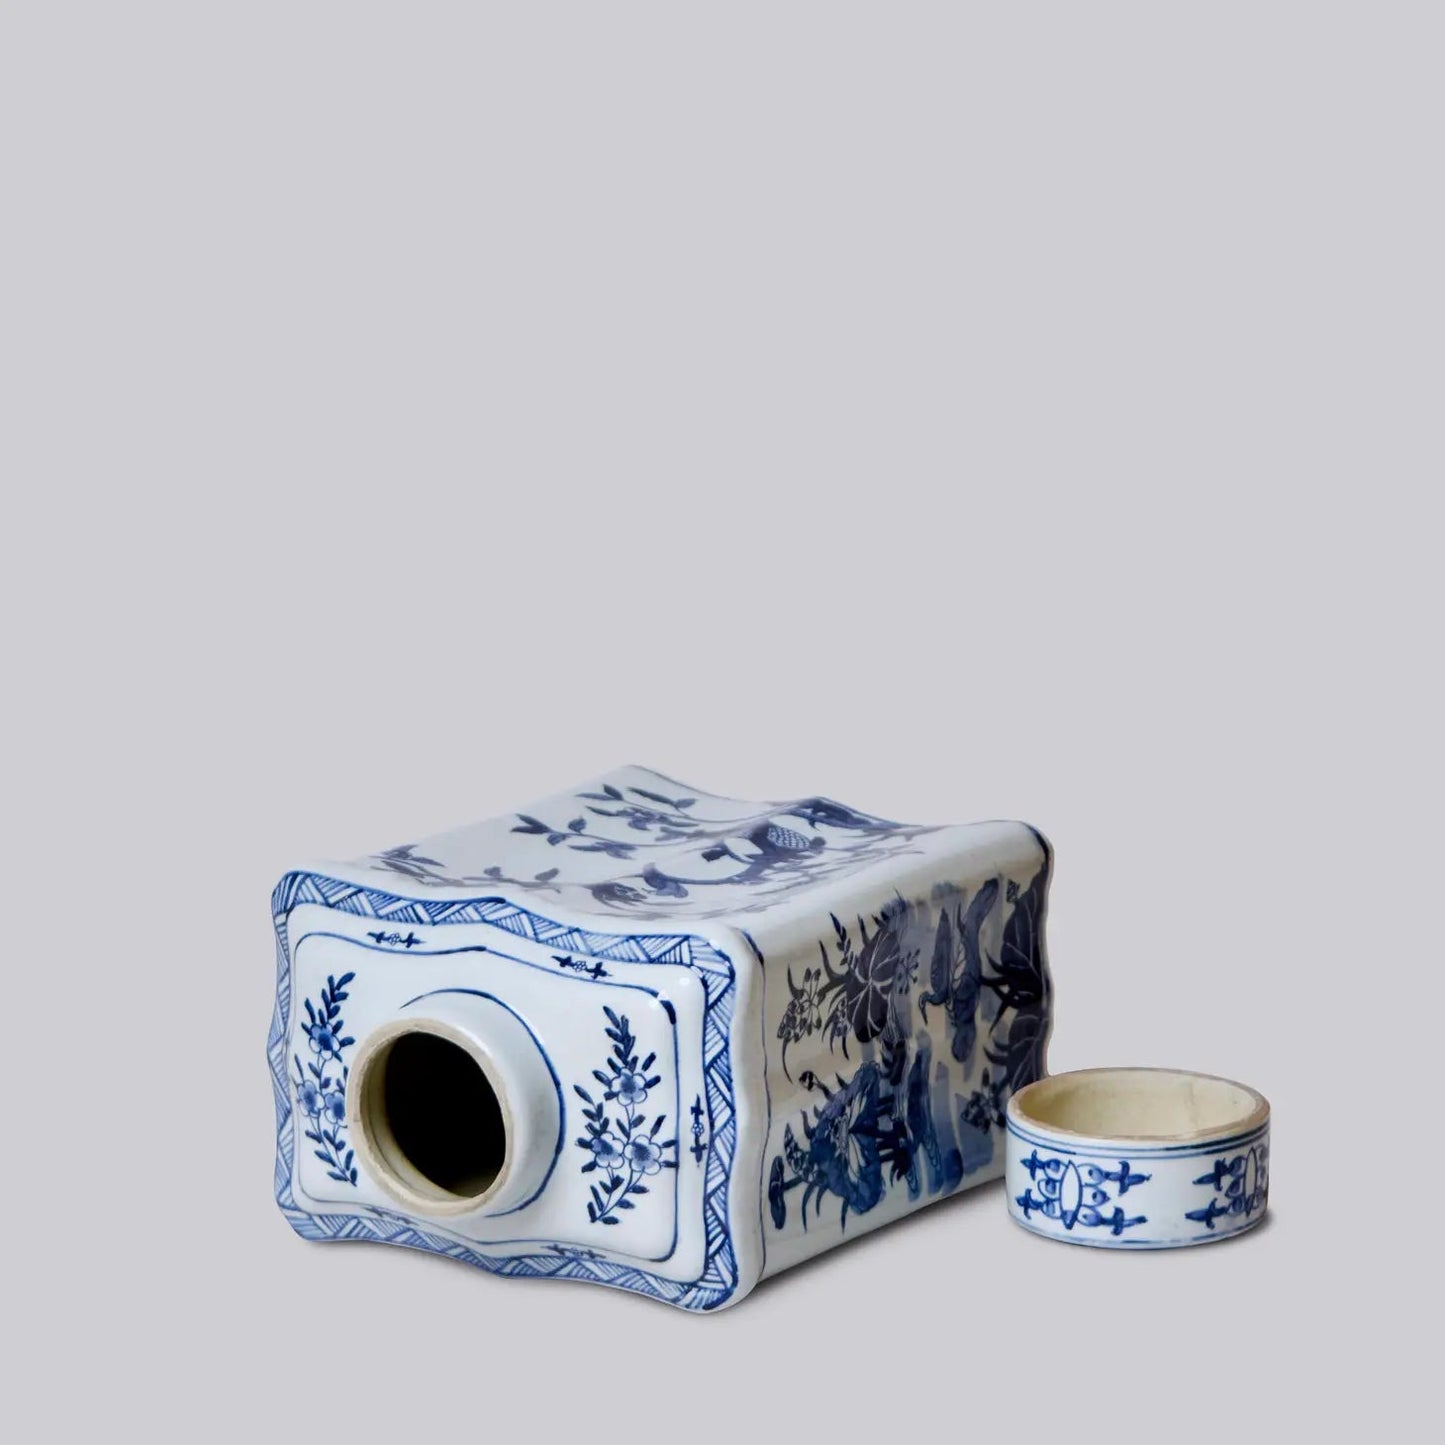 Bird and Flower Blue and White Porcelain Rectangular Caddy